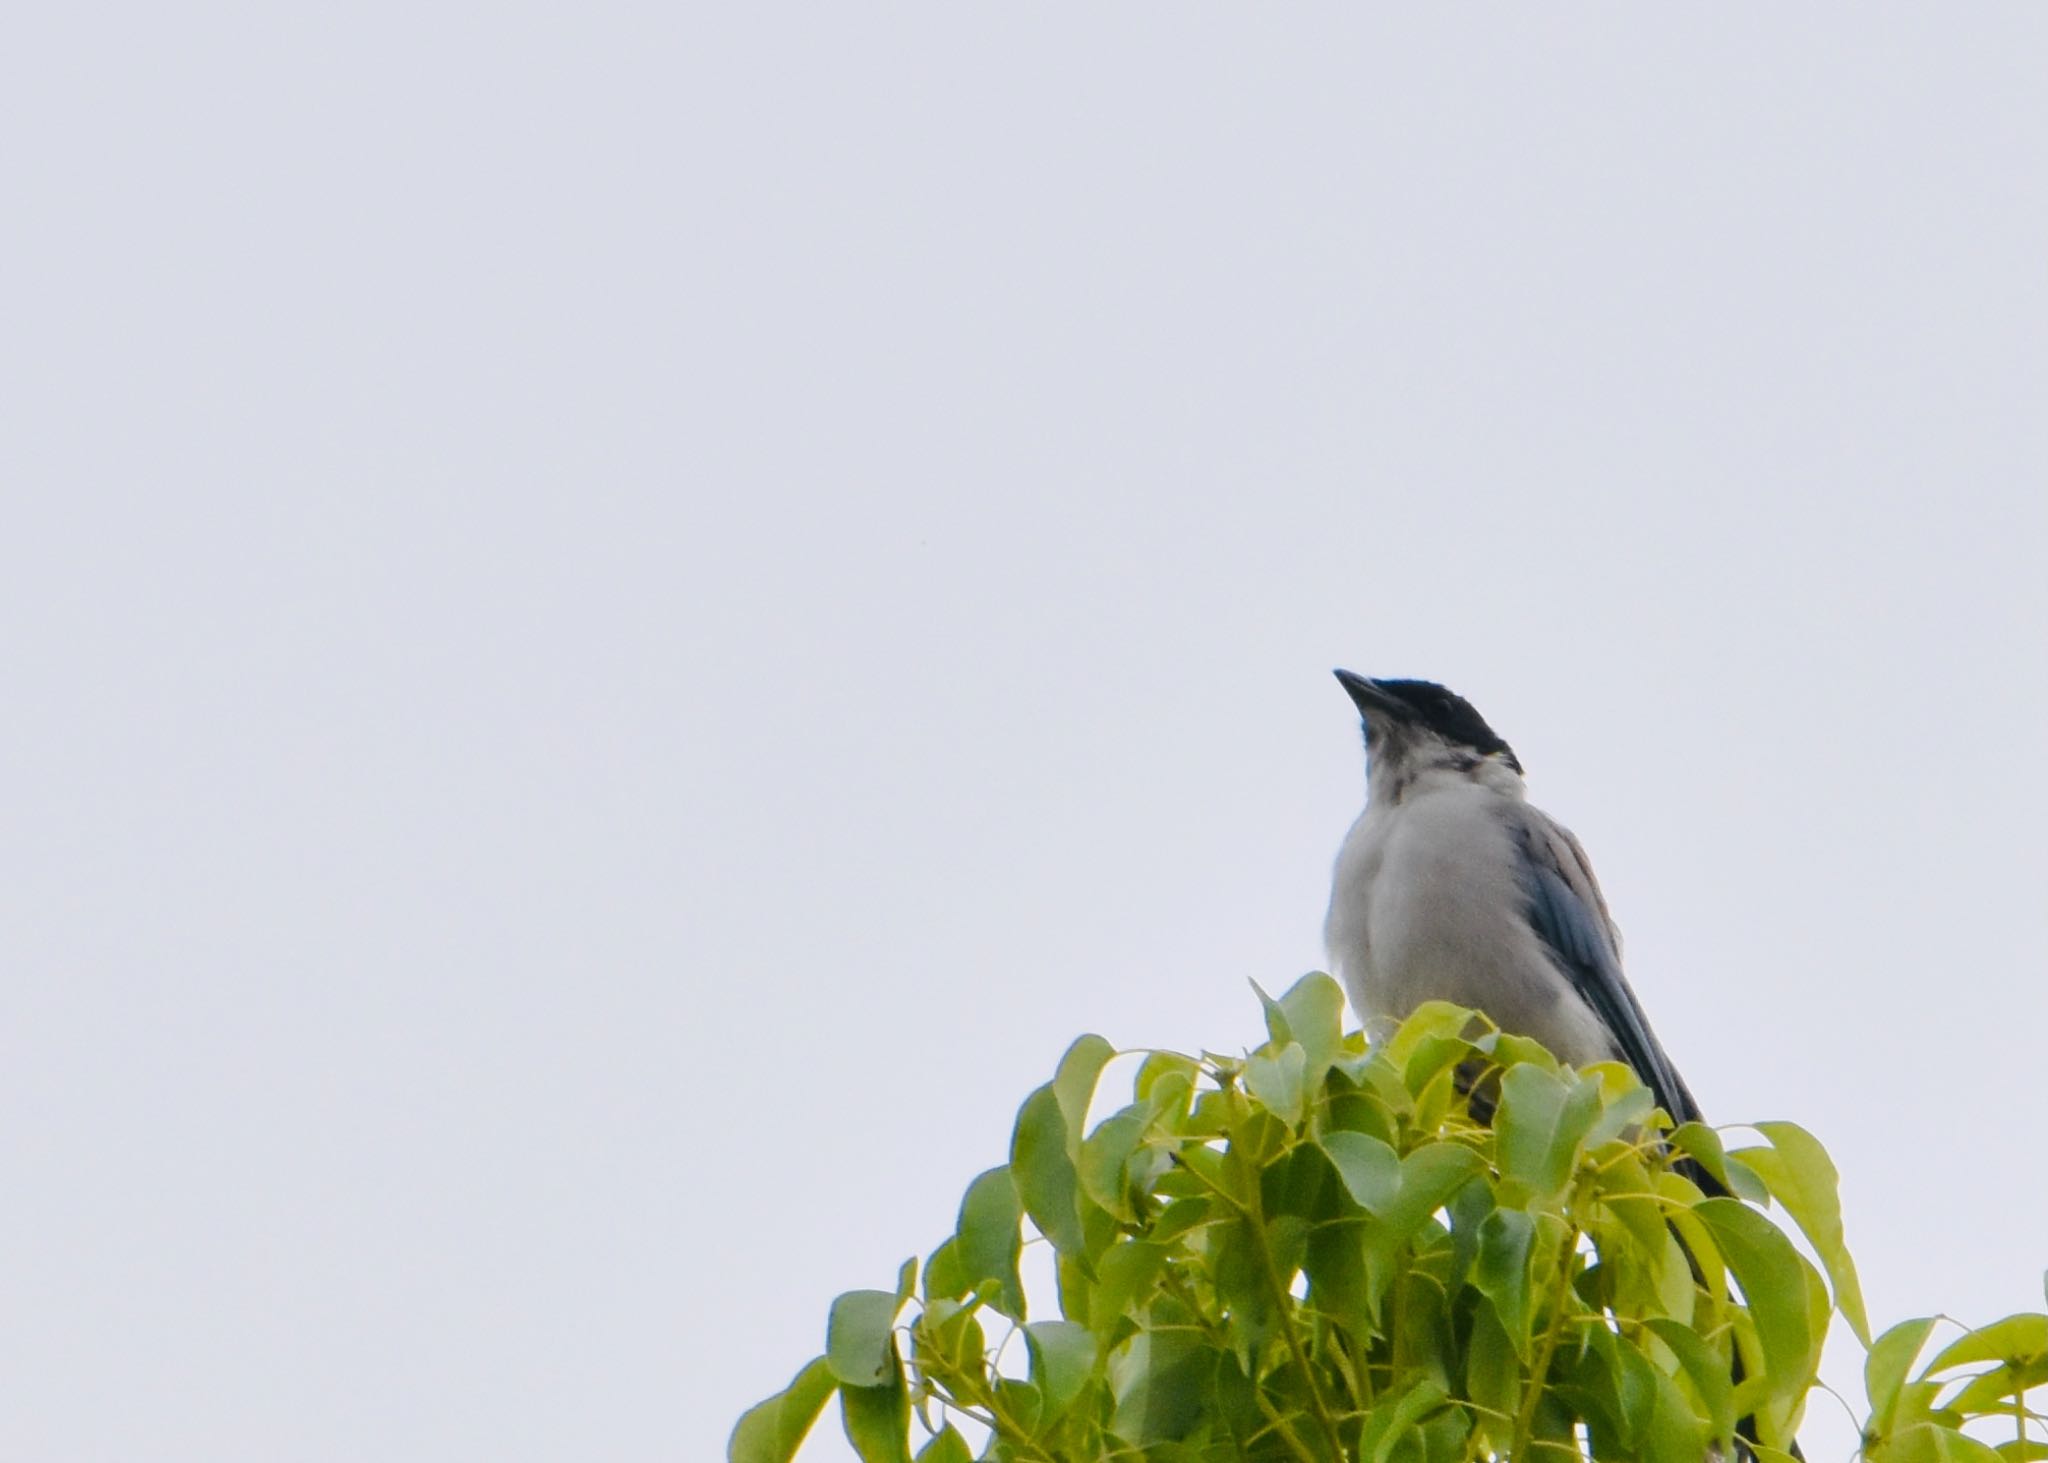 Photo of Azure-winged Magpie at Toneri Park by mochi17